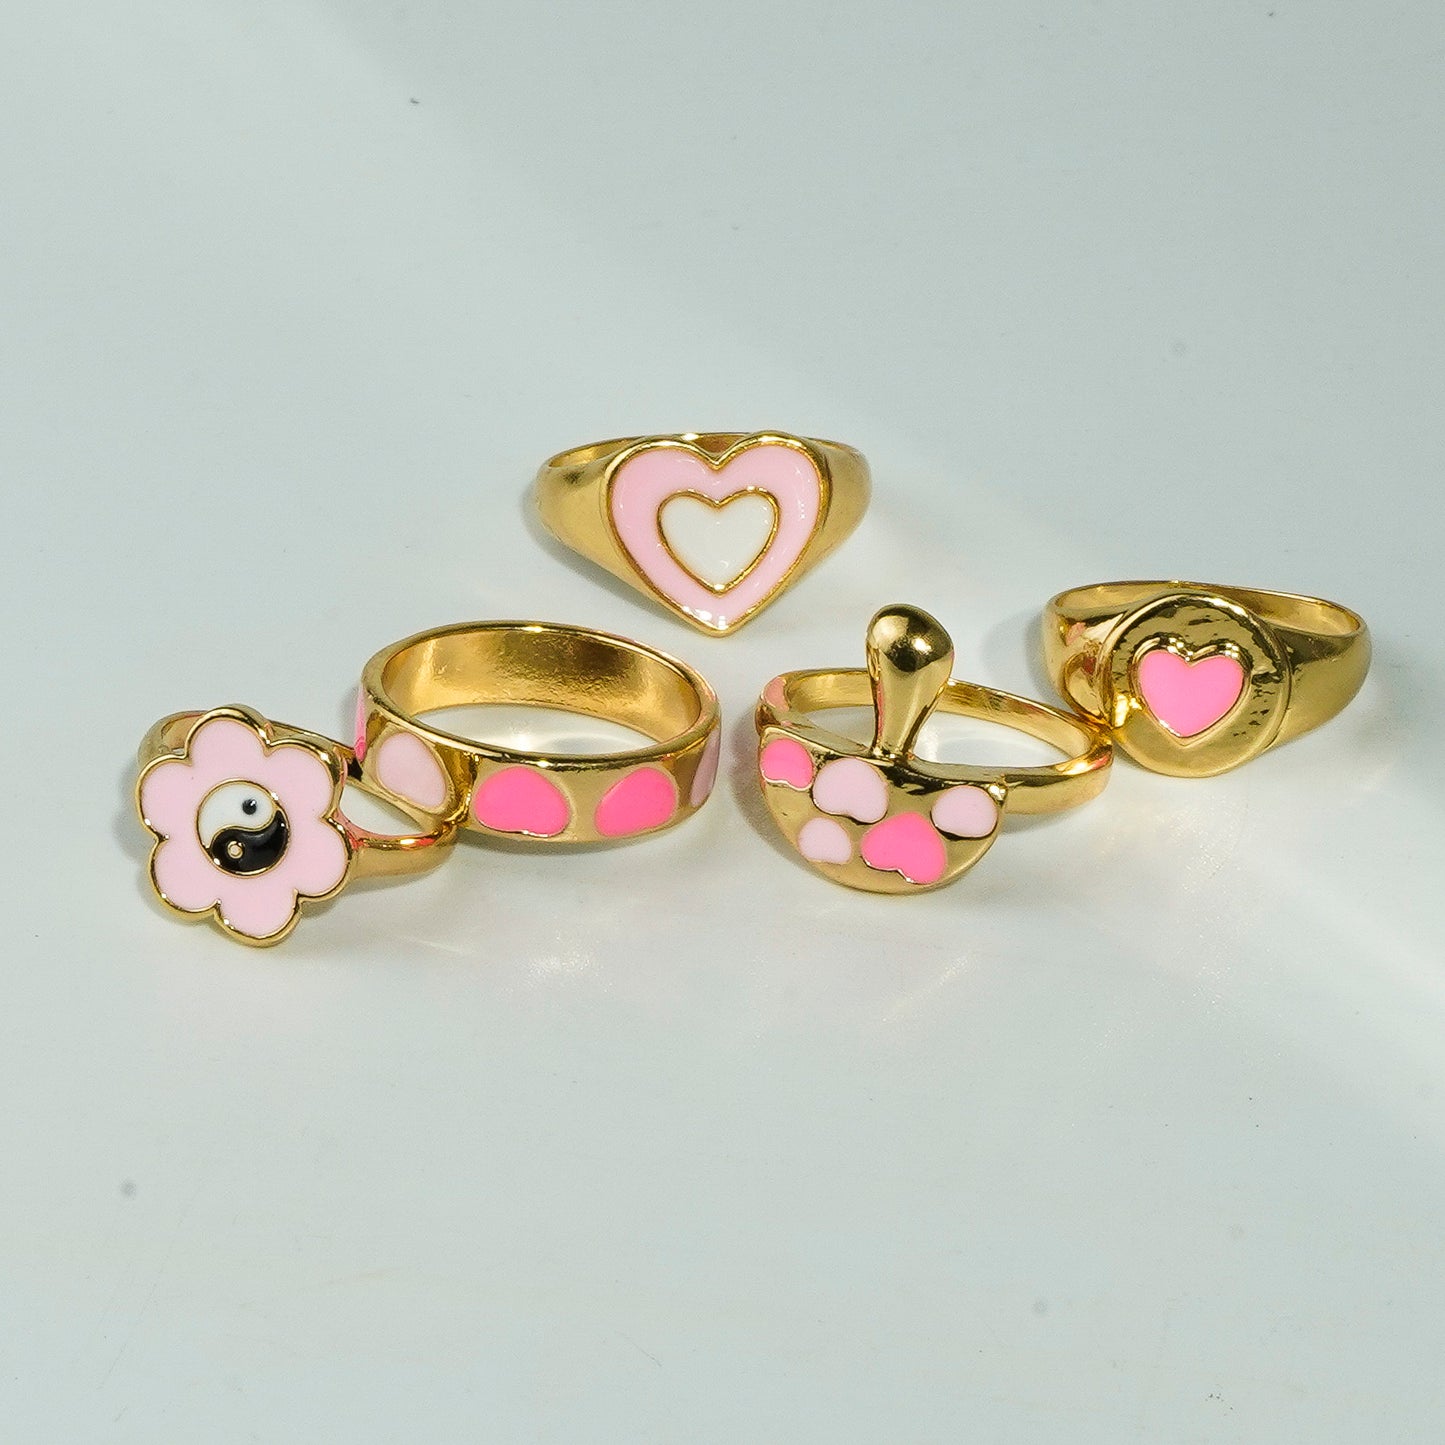 Trendy Set Ring For Fashionable Women(Code:R10)